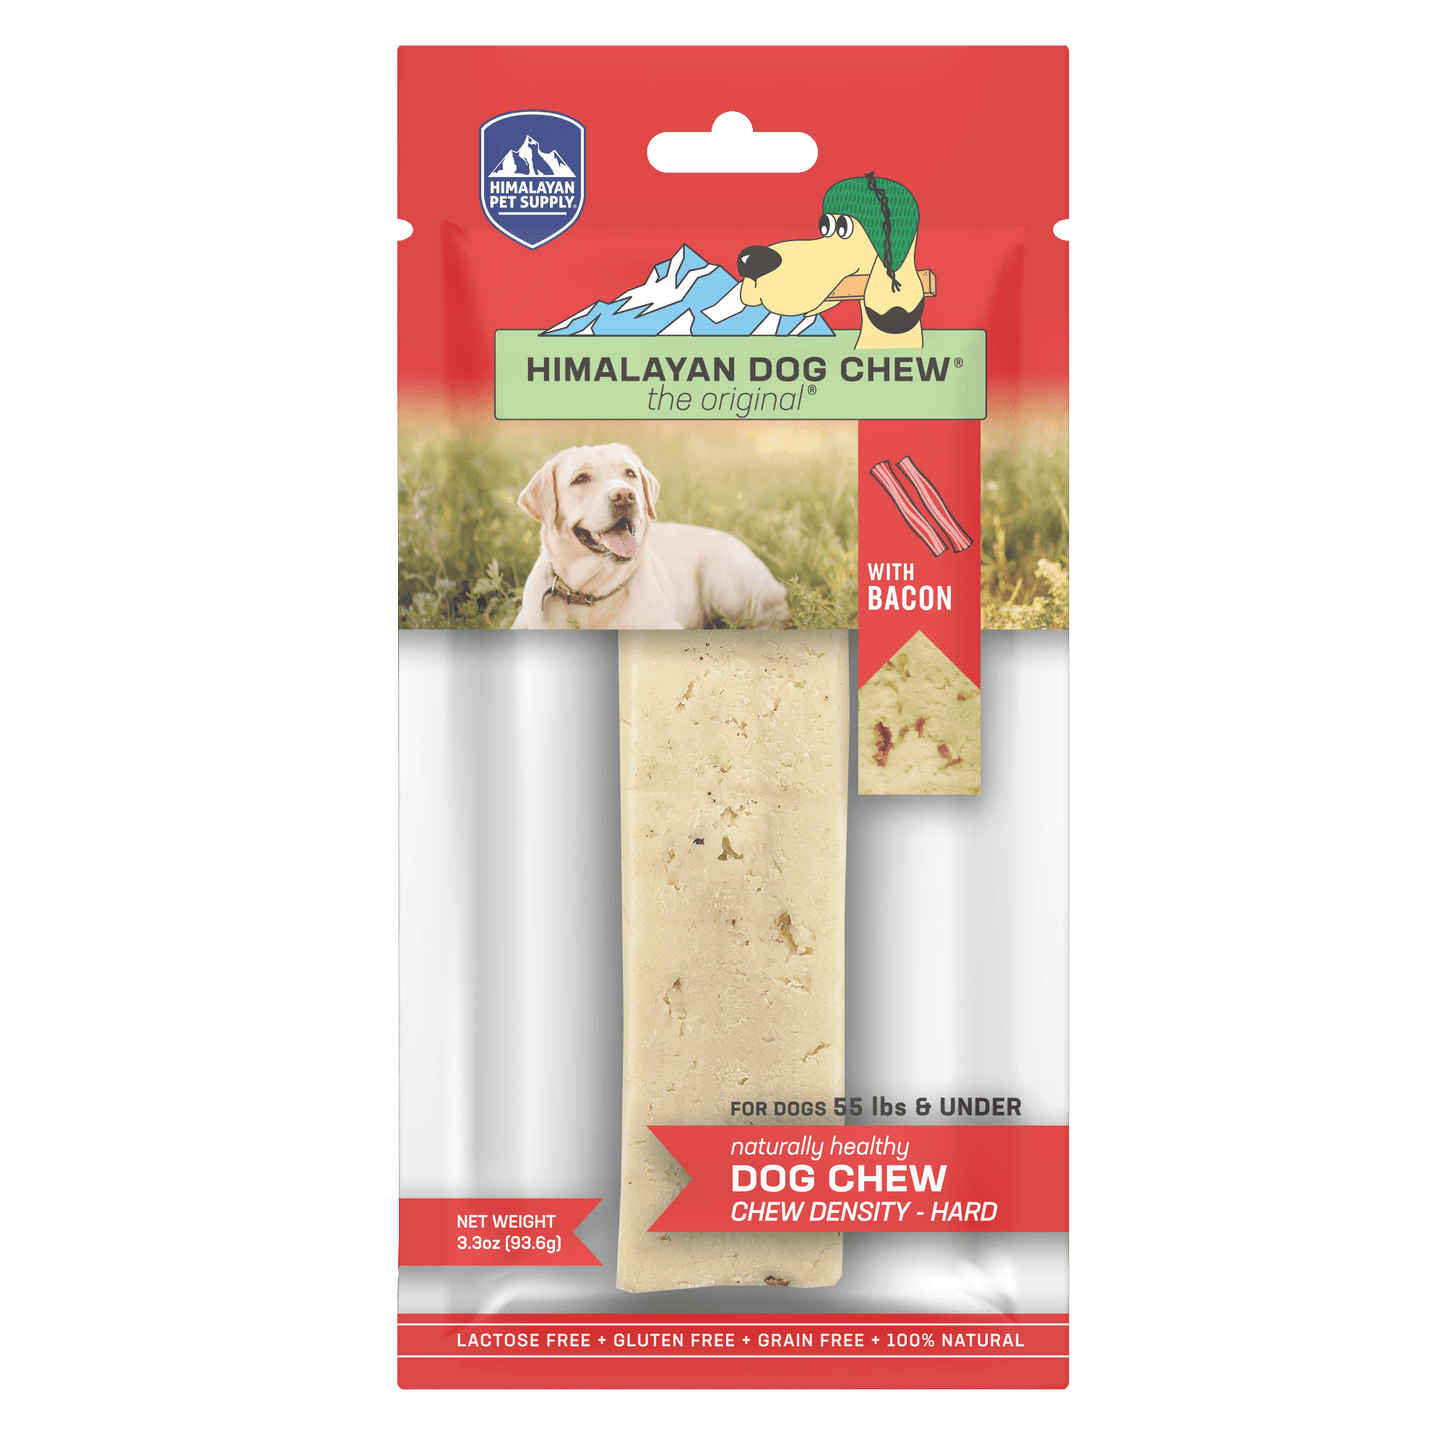 Himalayan Dog Chew Large For Dogs up to 55# - Bacon